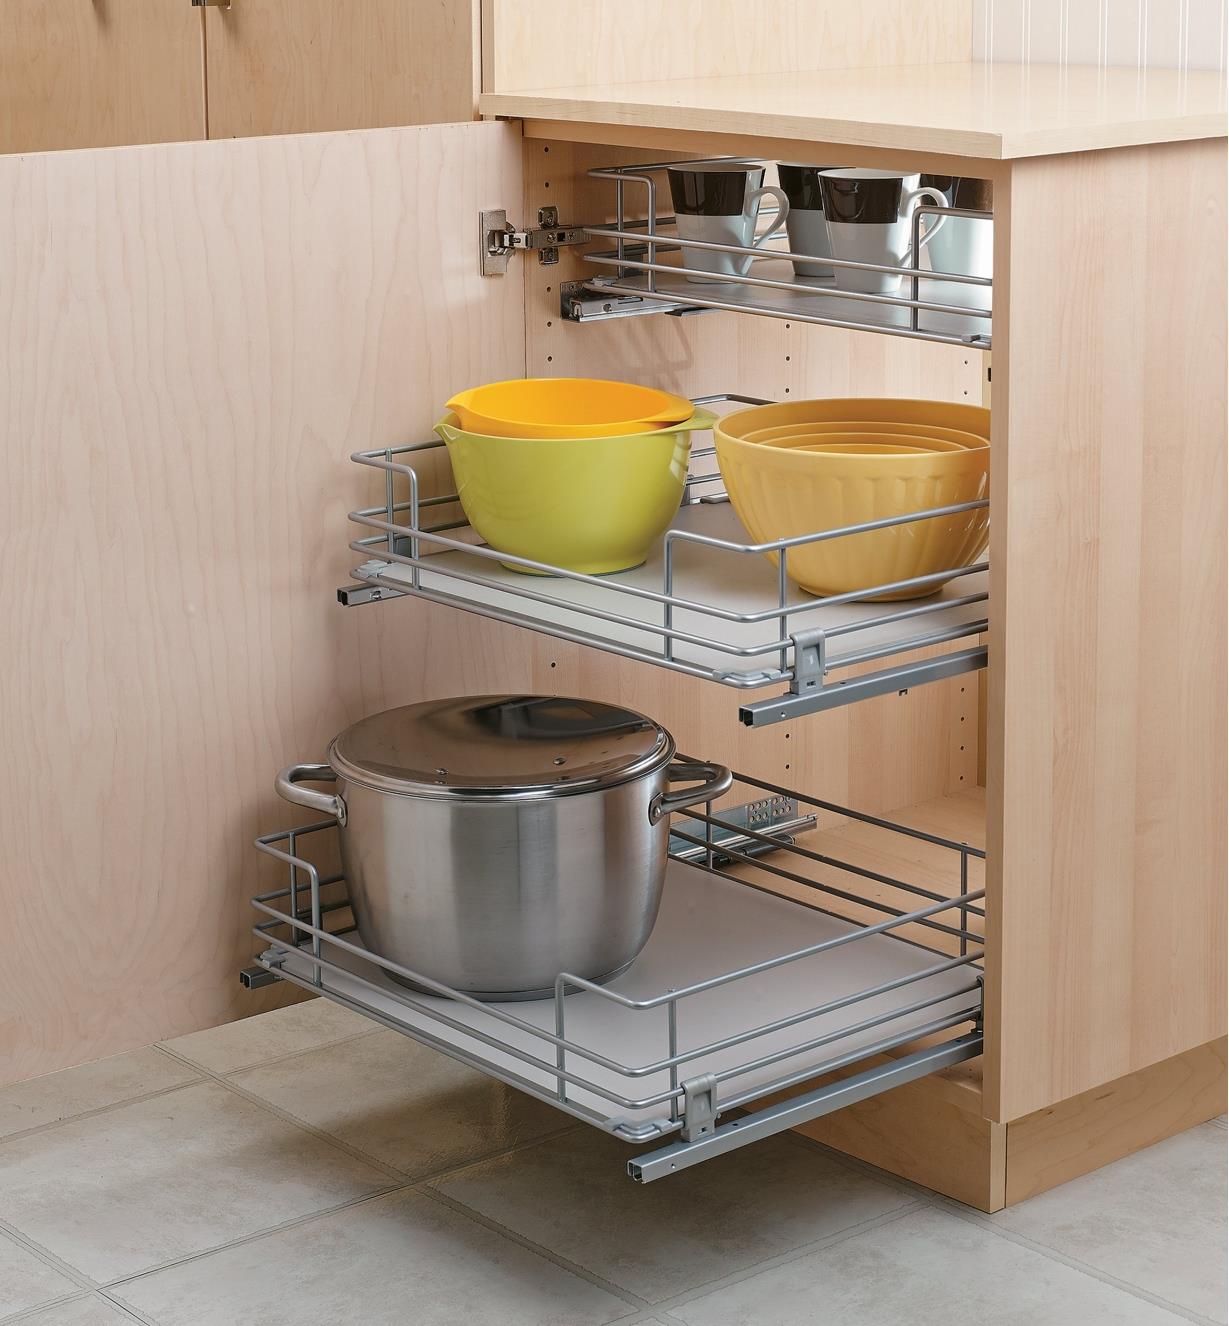 Example of three pull-out drawers installed in a cabinet